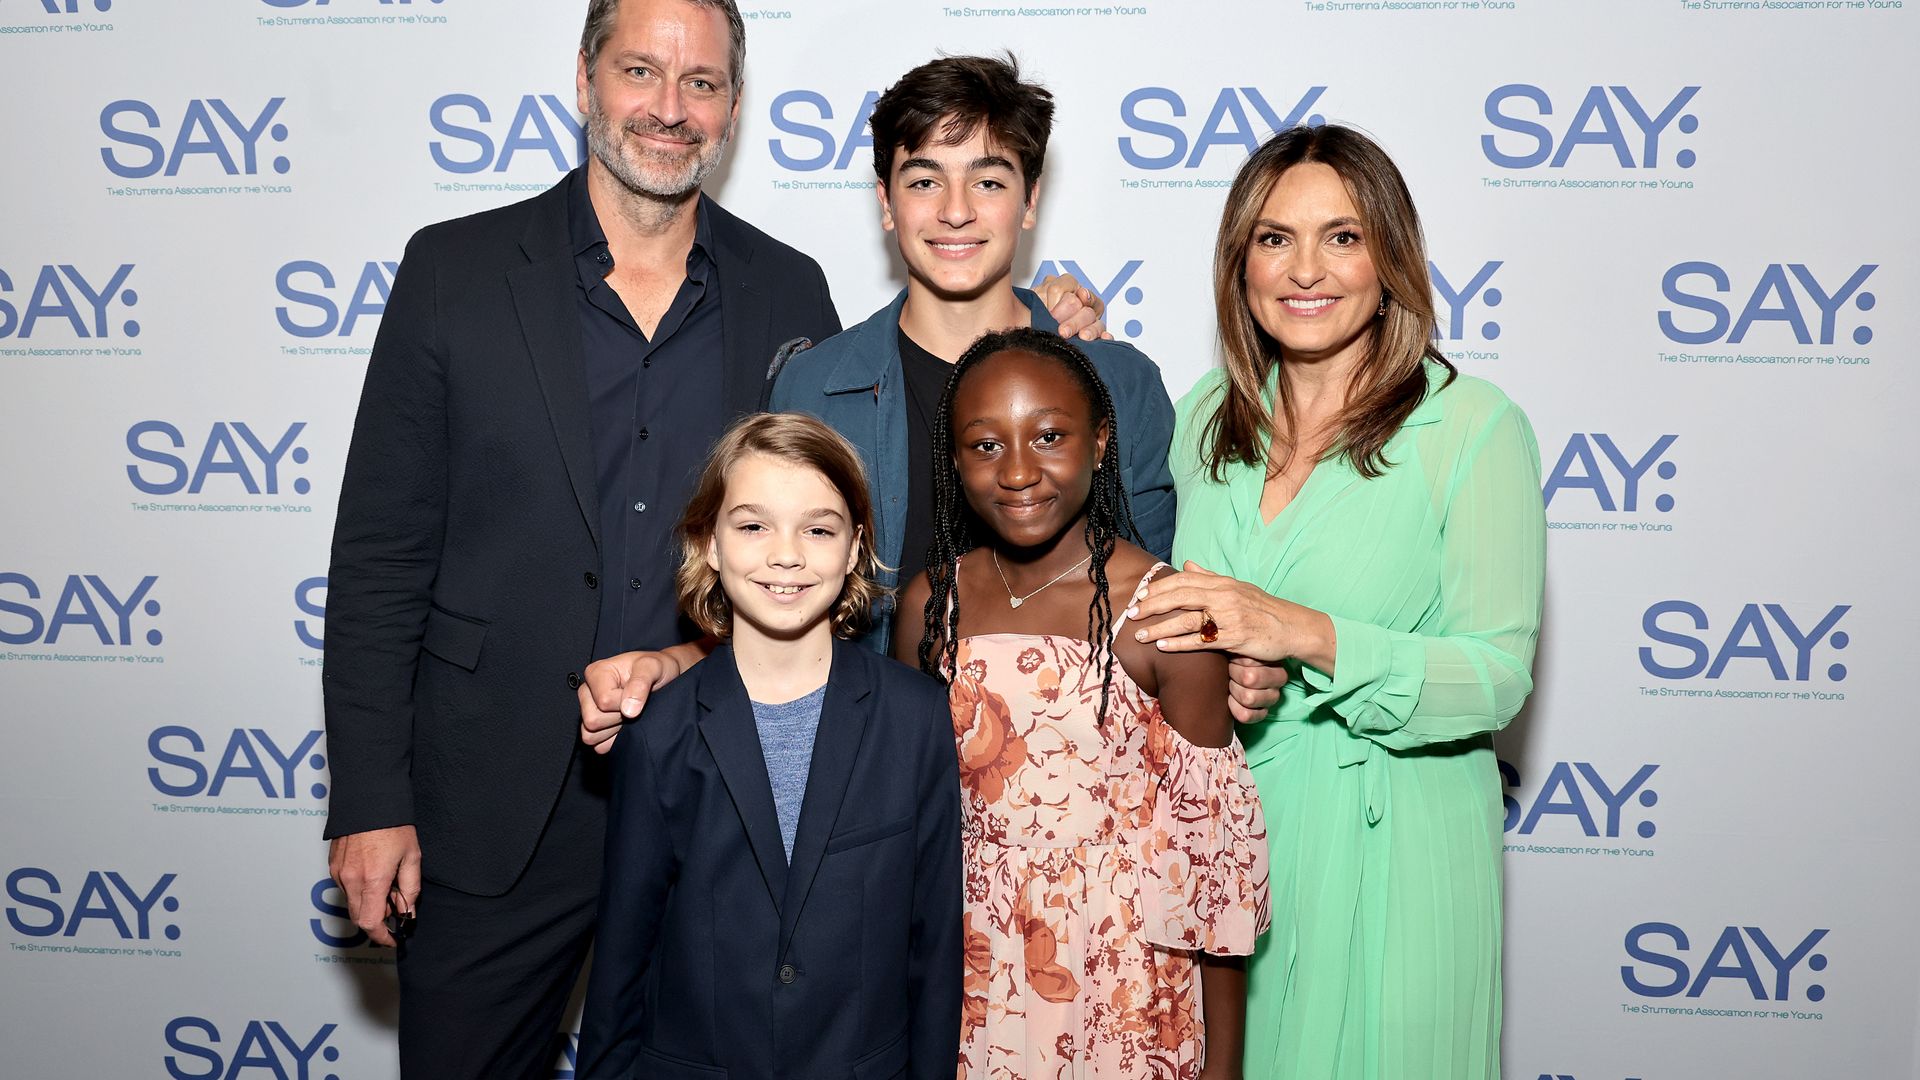 NEW YORK, NEW YORK - MAY 22: Peter Hermann and Mariska Hargitay pose with their children, August Miklos Friedrich Hermann, Andrew Nicolas Hargitay Hermann and Amaya Josephine Hermann at the 2023 Stuttering Association For The Young (SAY) Benefit Gala at The Edison Ballroom on May 22, 2023 in New York City. (Photo by Jamie McCarthy/Getty Images)